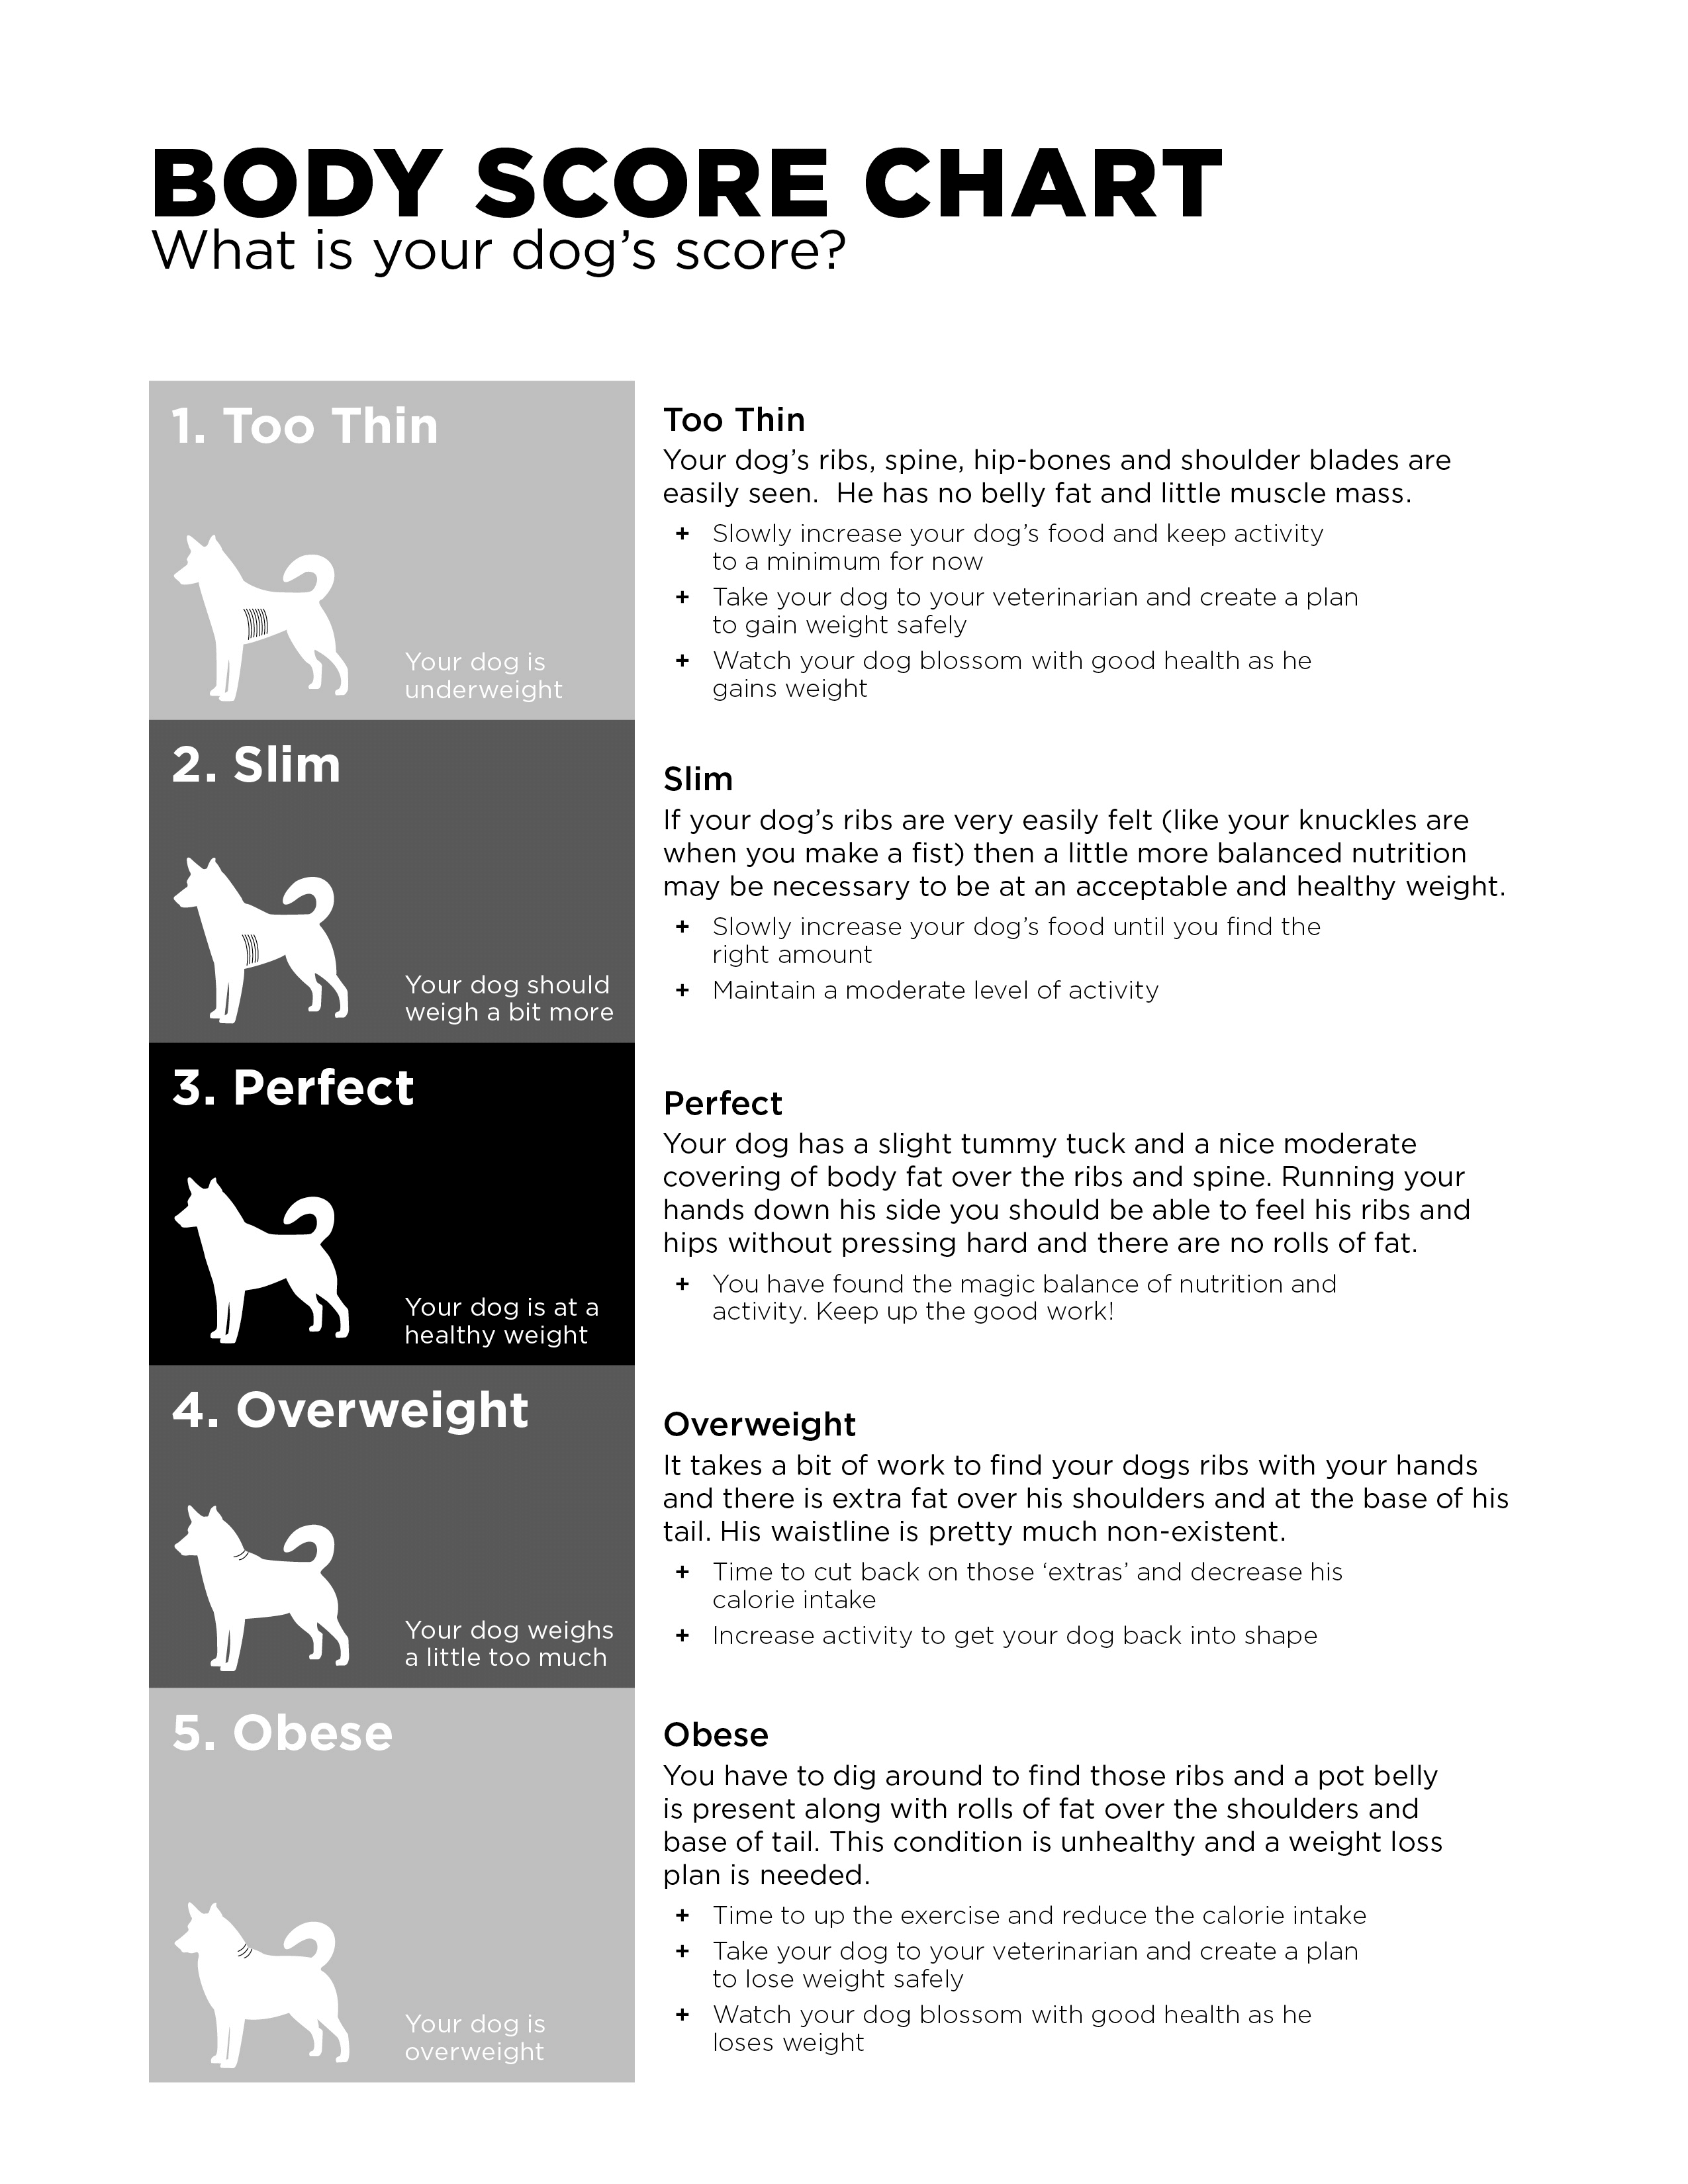 How To Find Your Dog's Body Condition Score